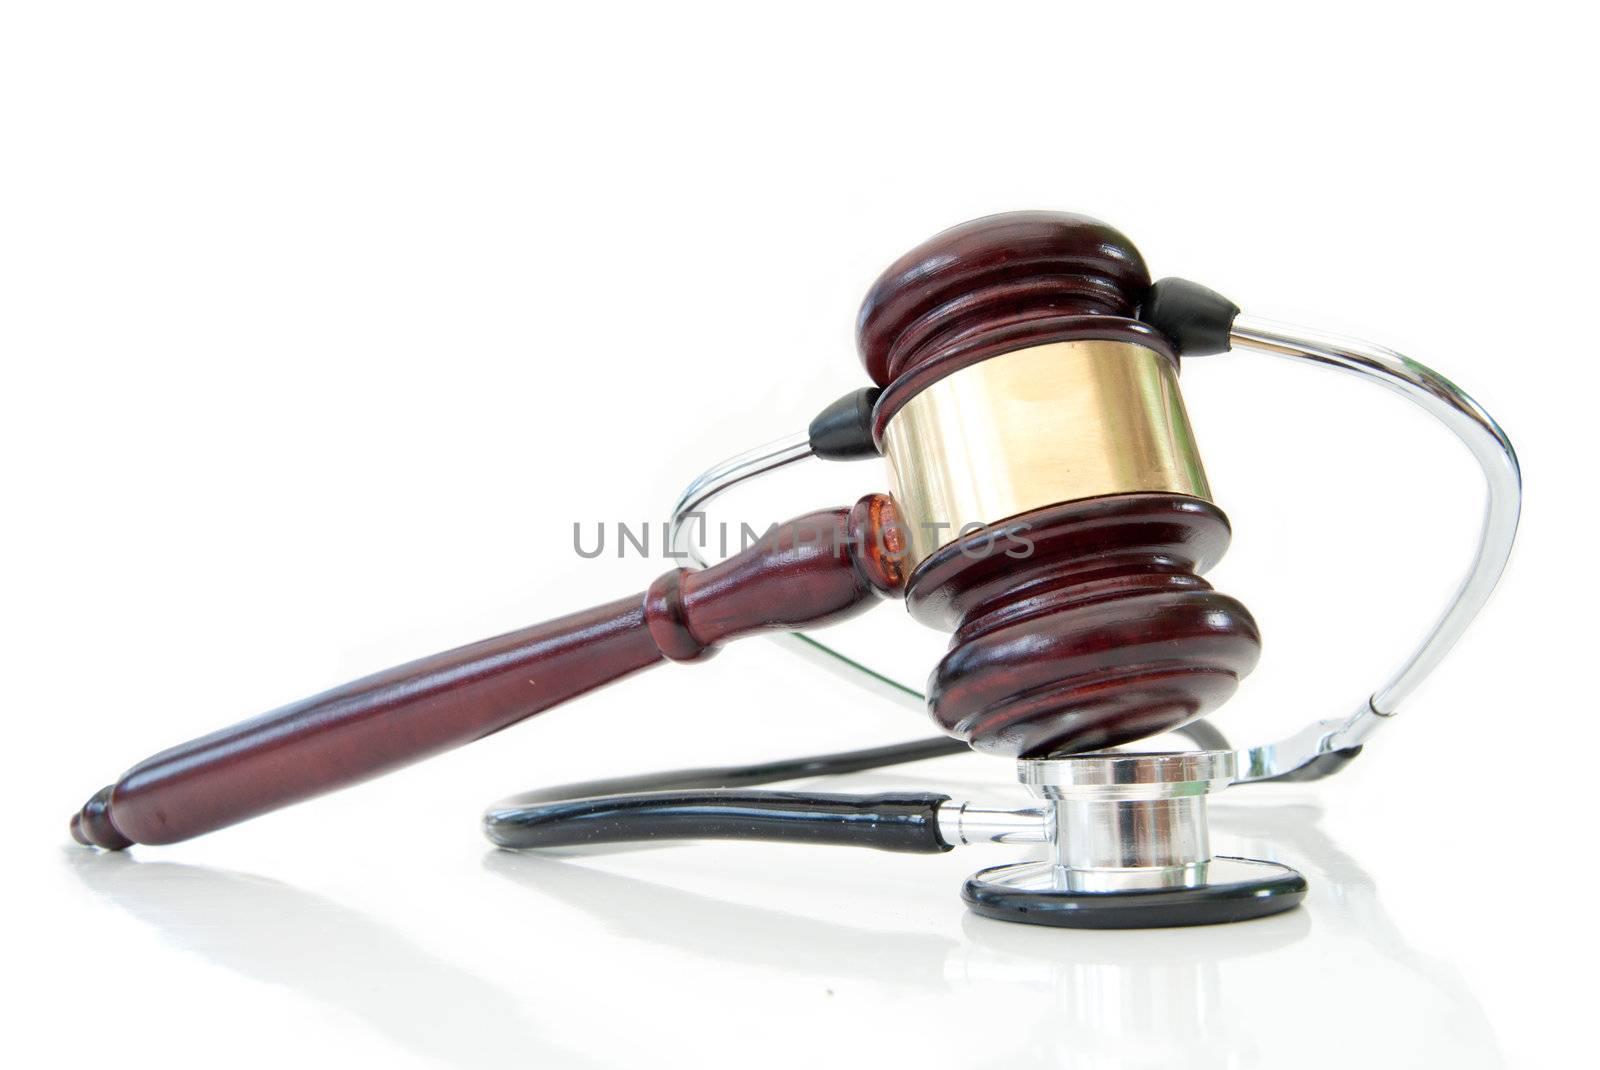 Stethoscope wrapped around a gavel over a white background